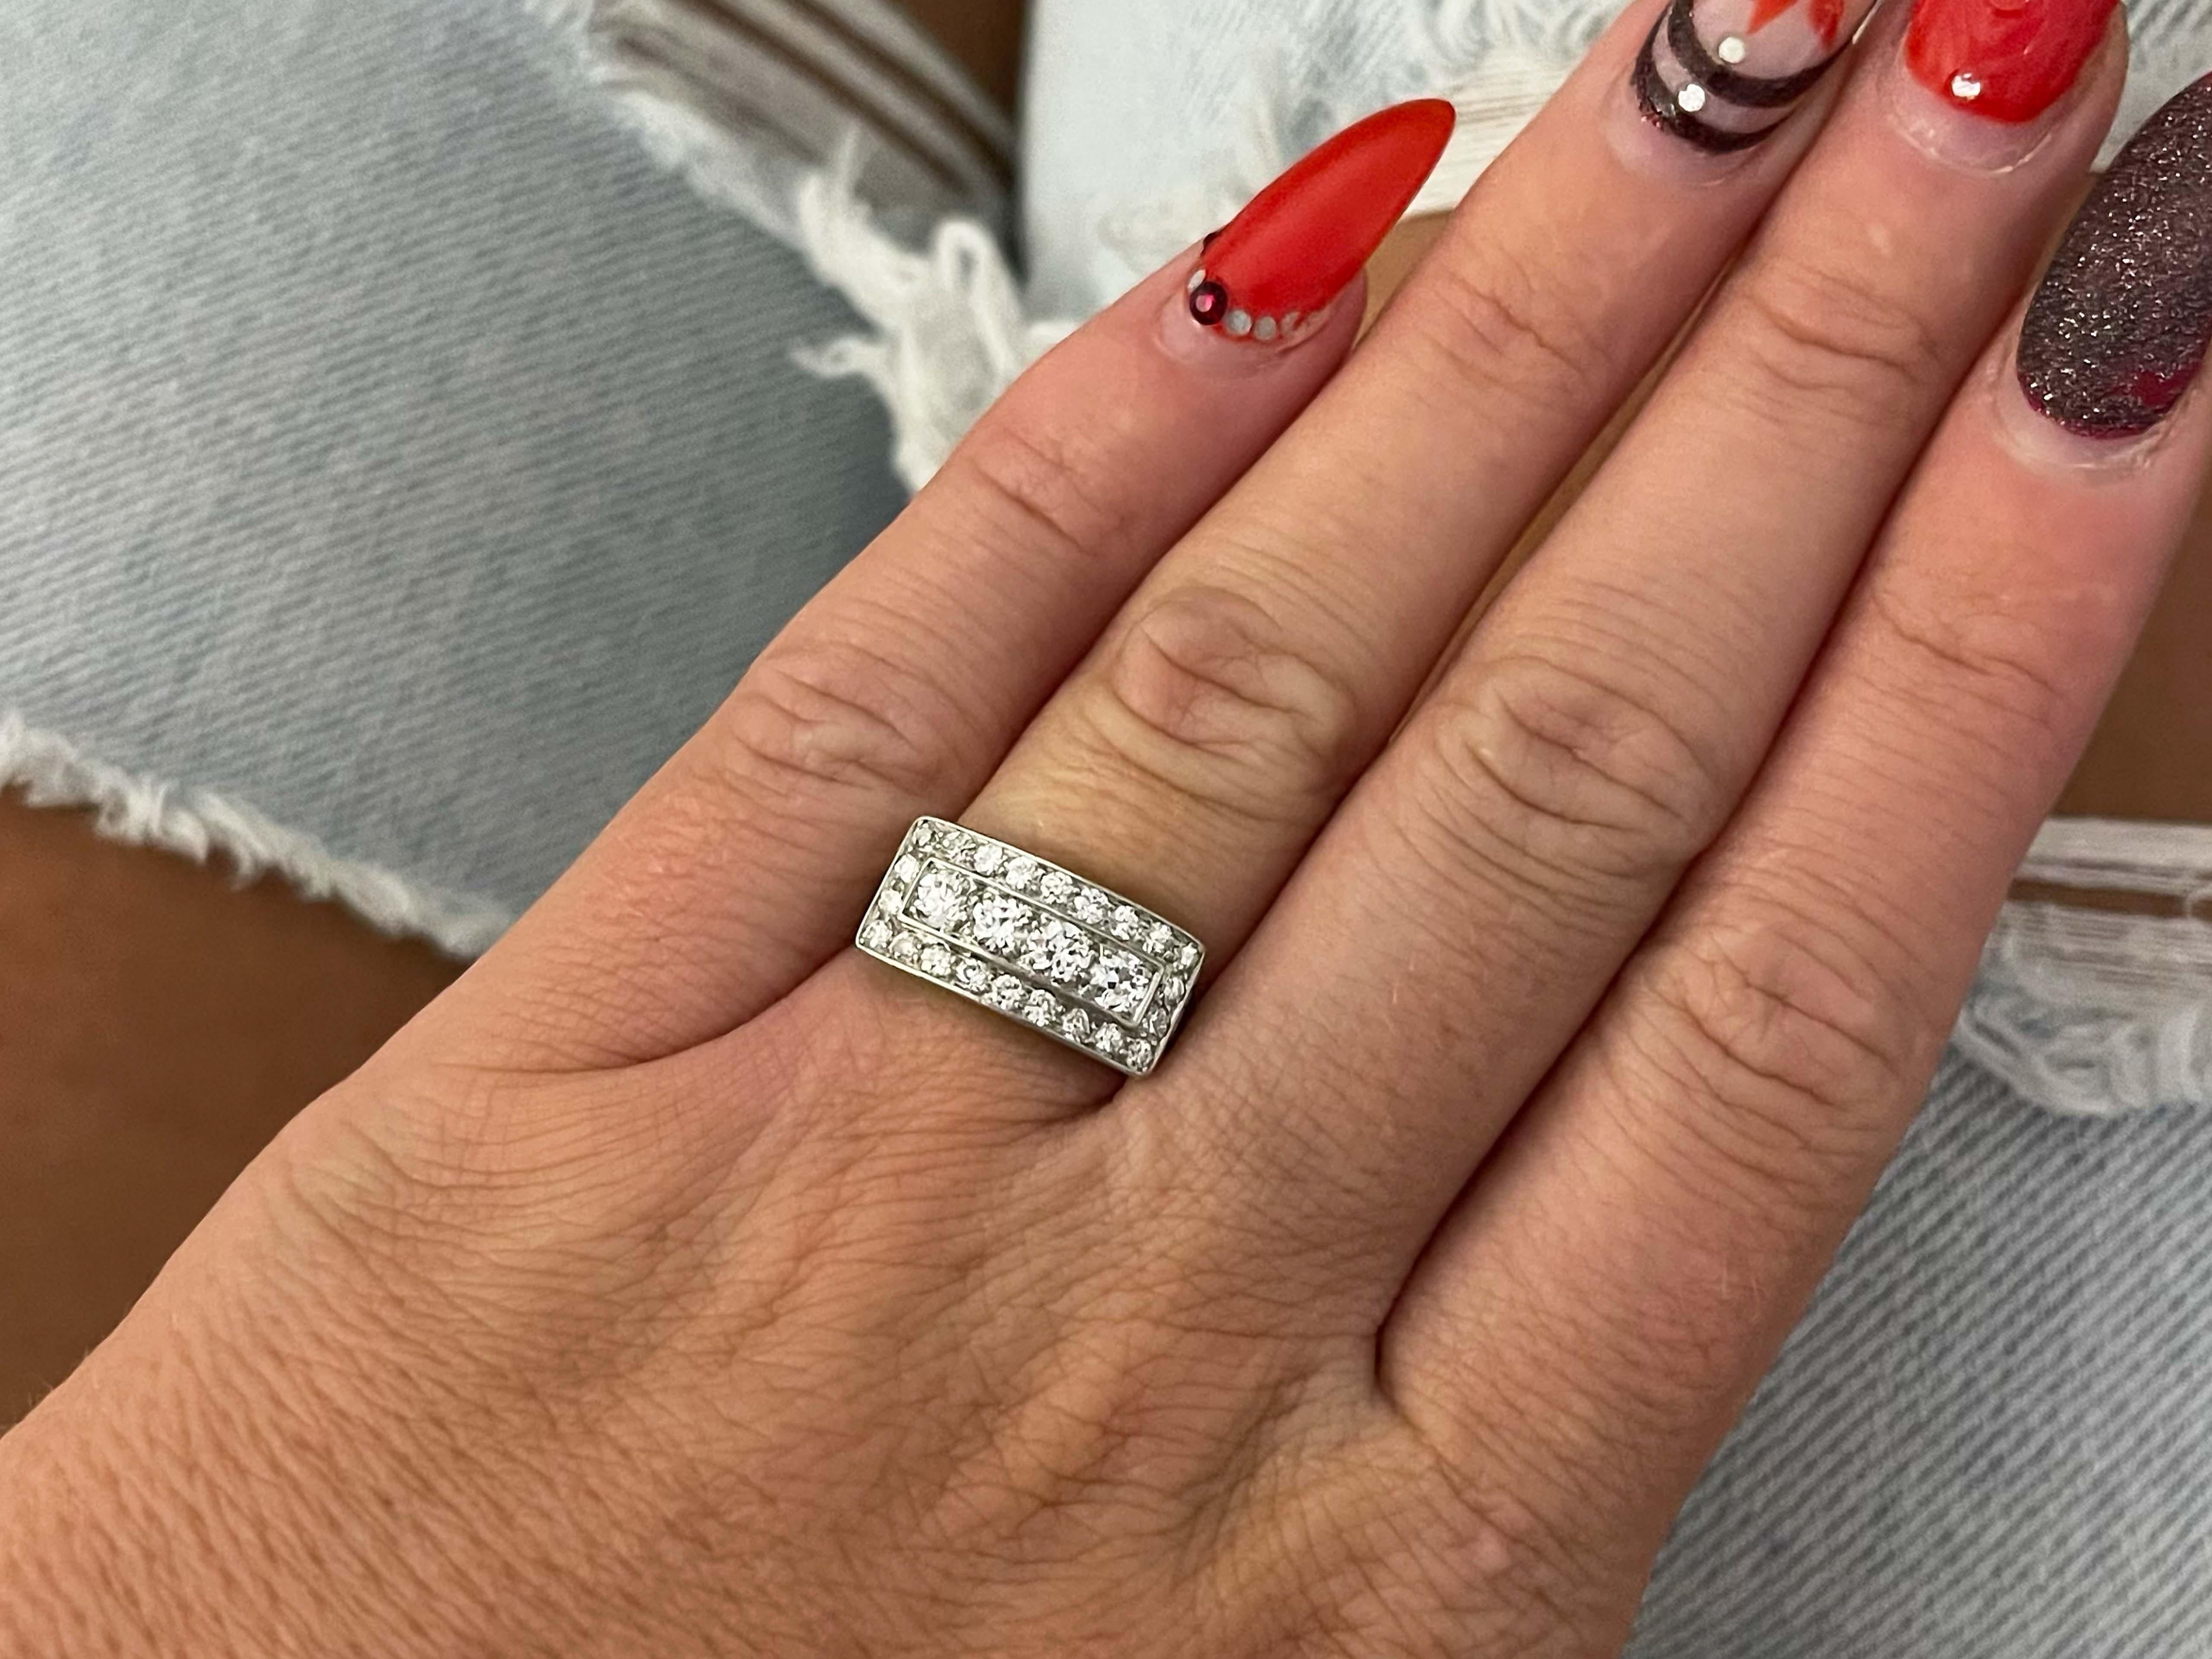 Ring Specifications:

Gender: Women 

Style: Wide Diamond Band Ring

Metal: Platinum 

Ring Size: 5.75 (ask about resizing)

Total Ring Weight: 4.4  Grams
​
​Ring Height: 8.59 mm

Total Diamond Weight: ~0.60 carats (4 center) + ~0.44 carats (22